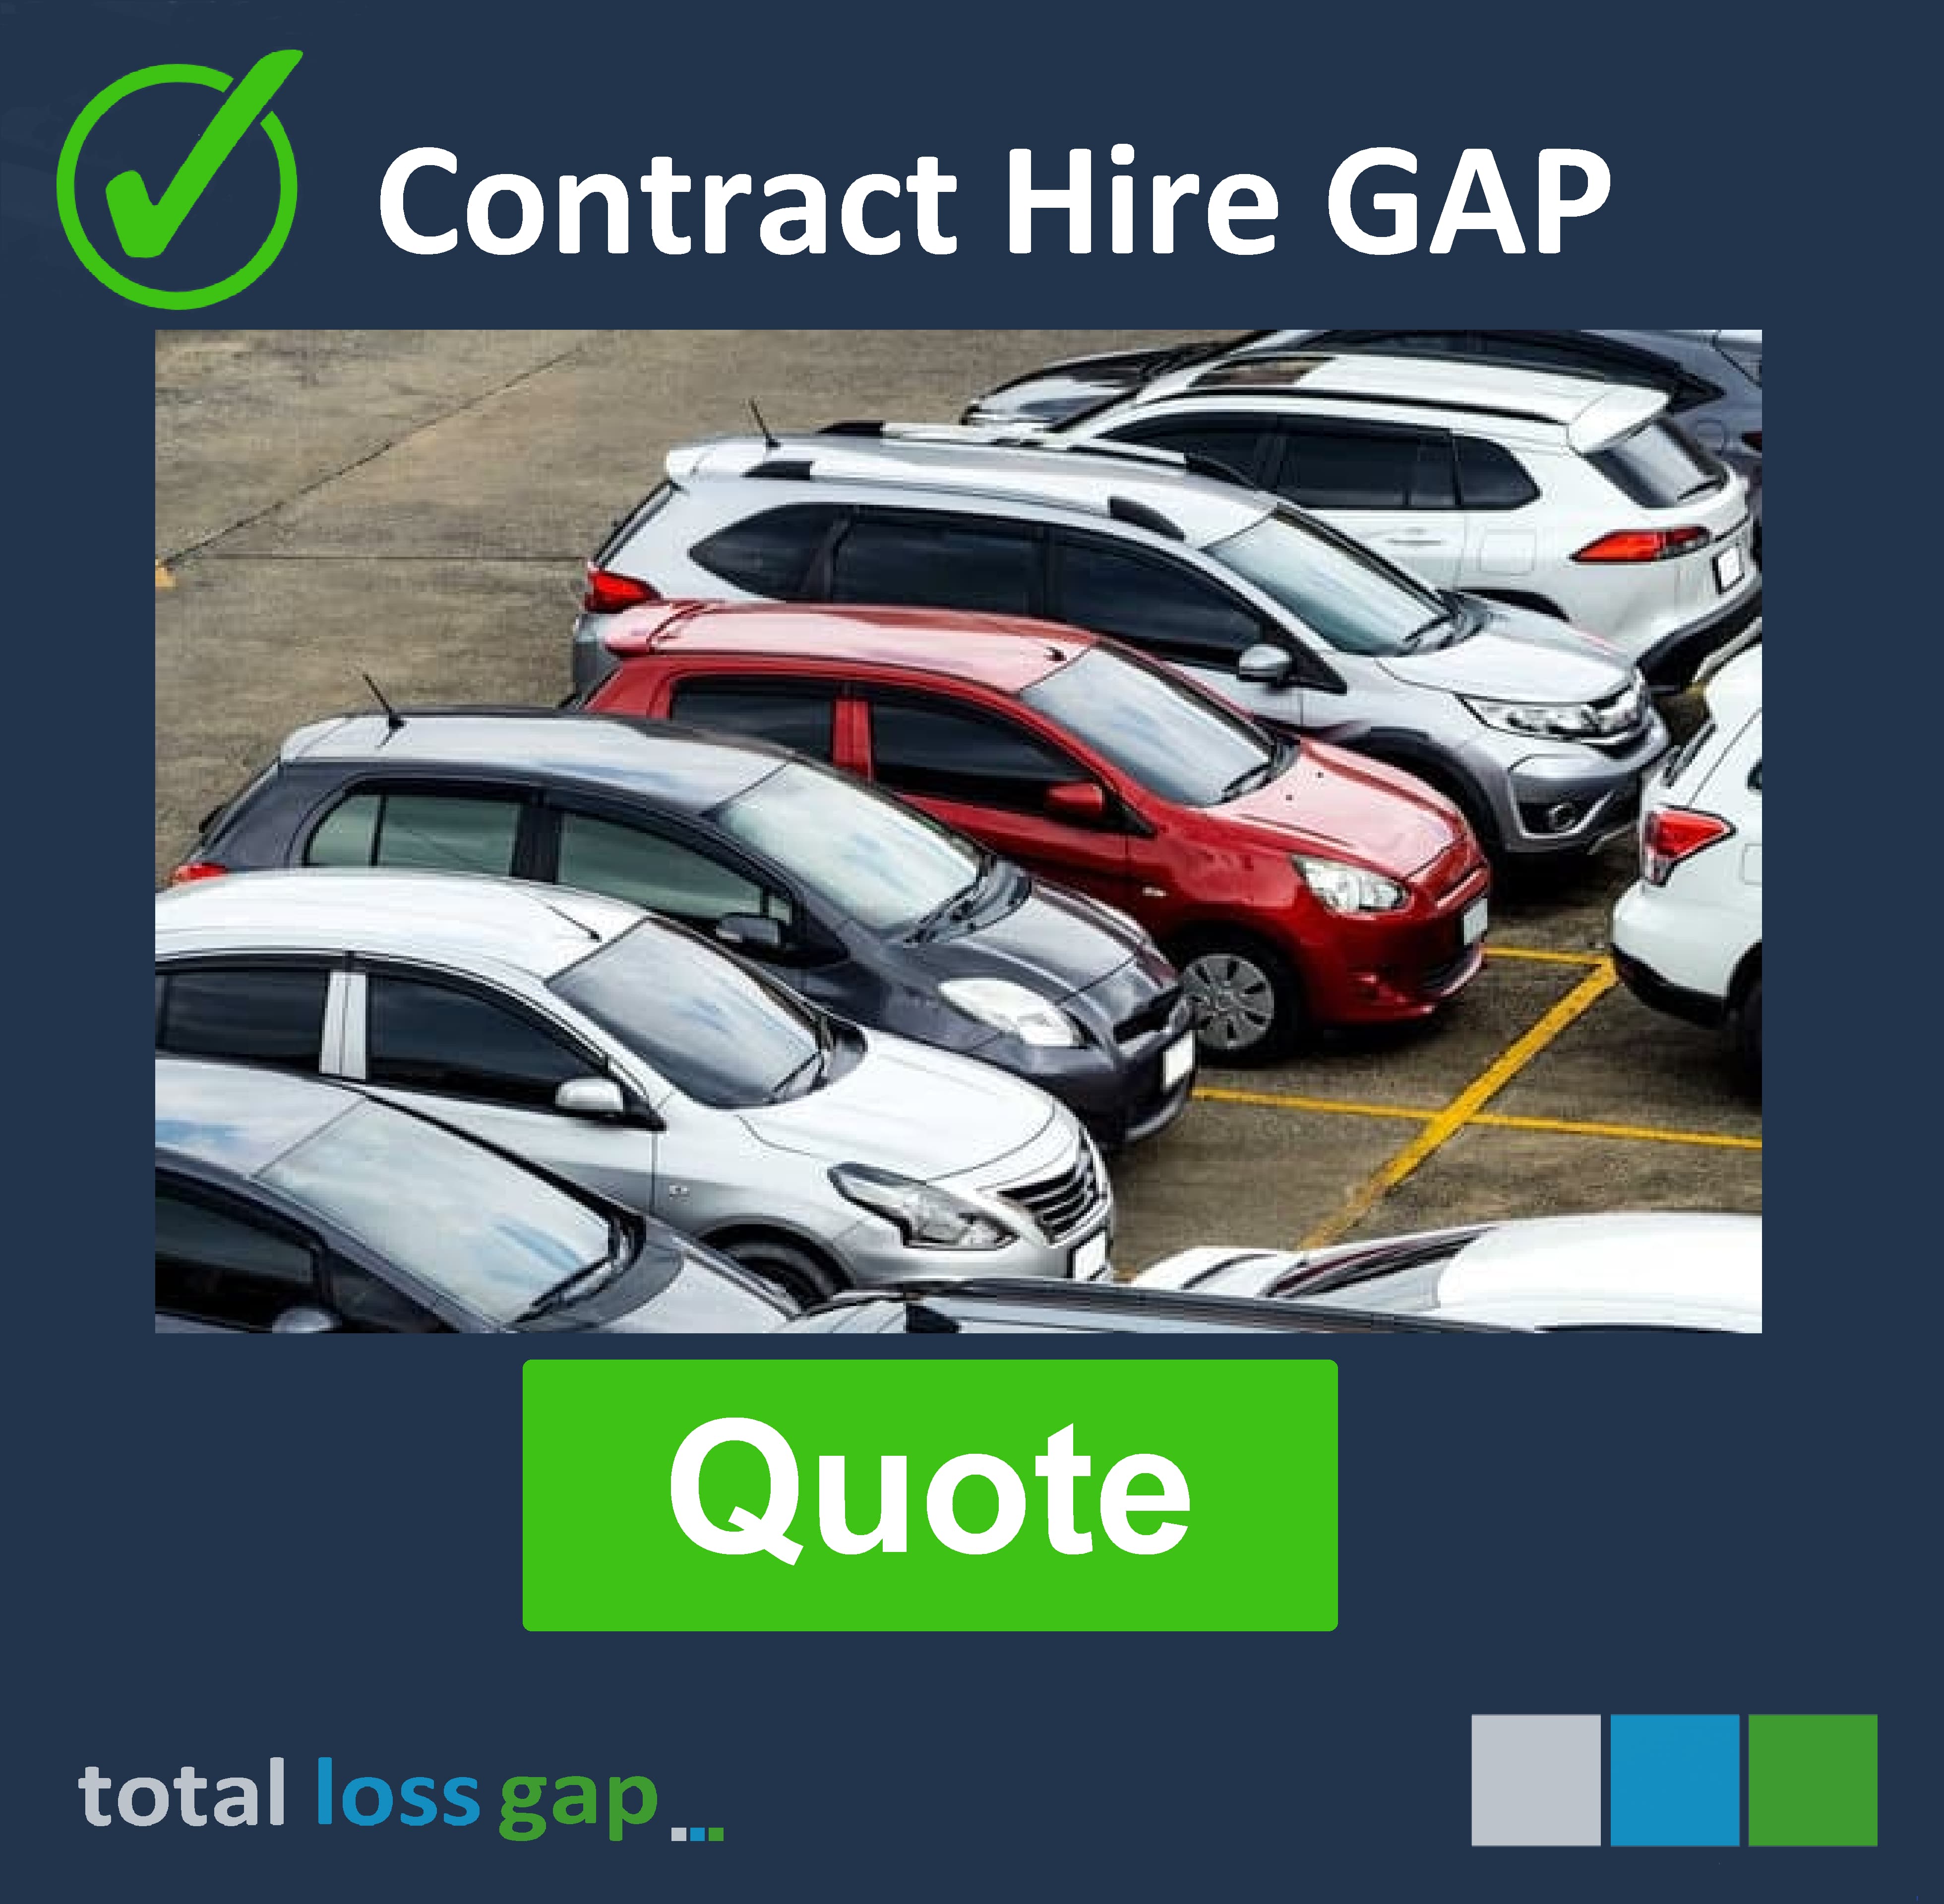 Get a quote for Contract Hire Gap Insurance today